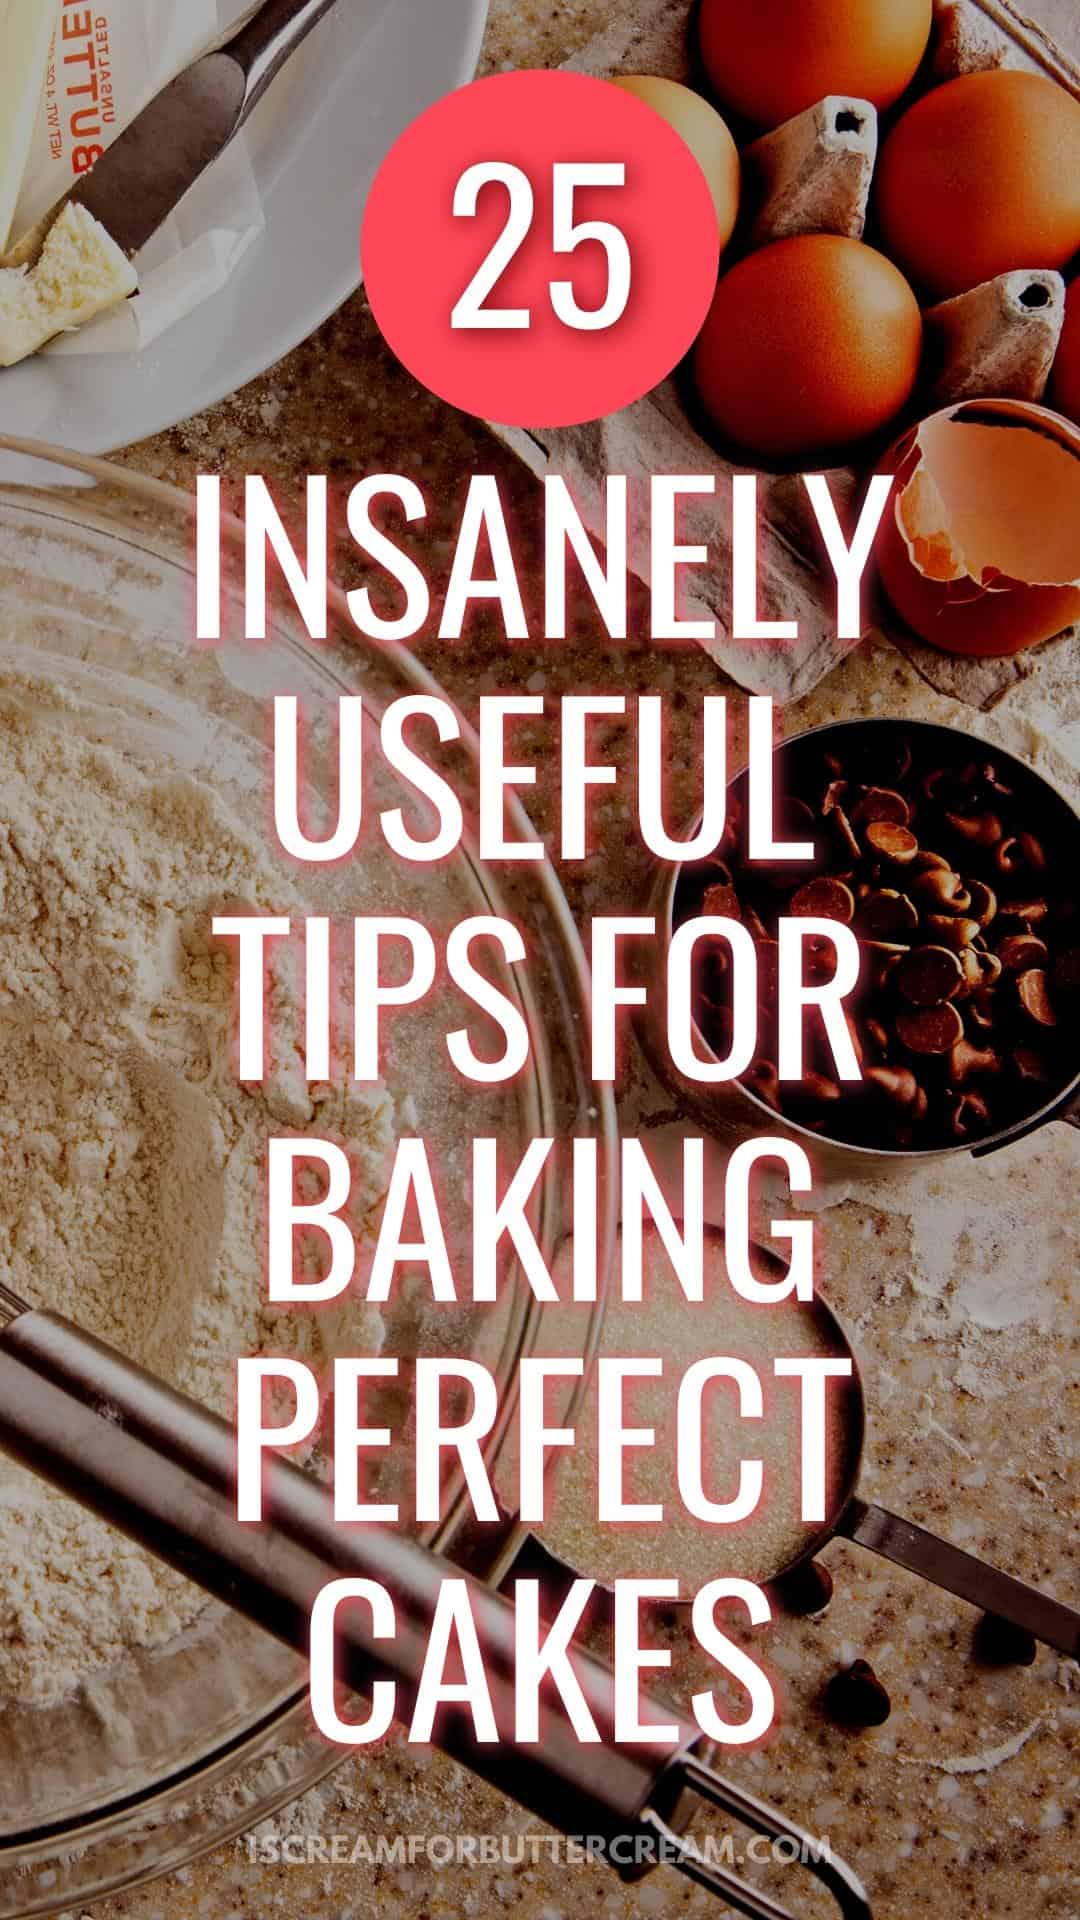 Useful baking tips pin graphic with text overlay.